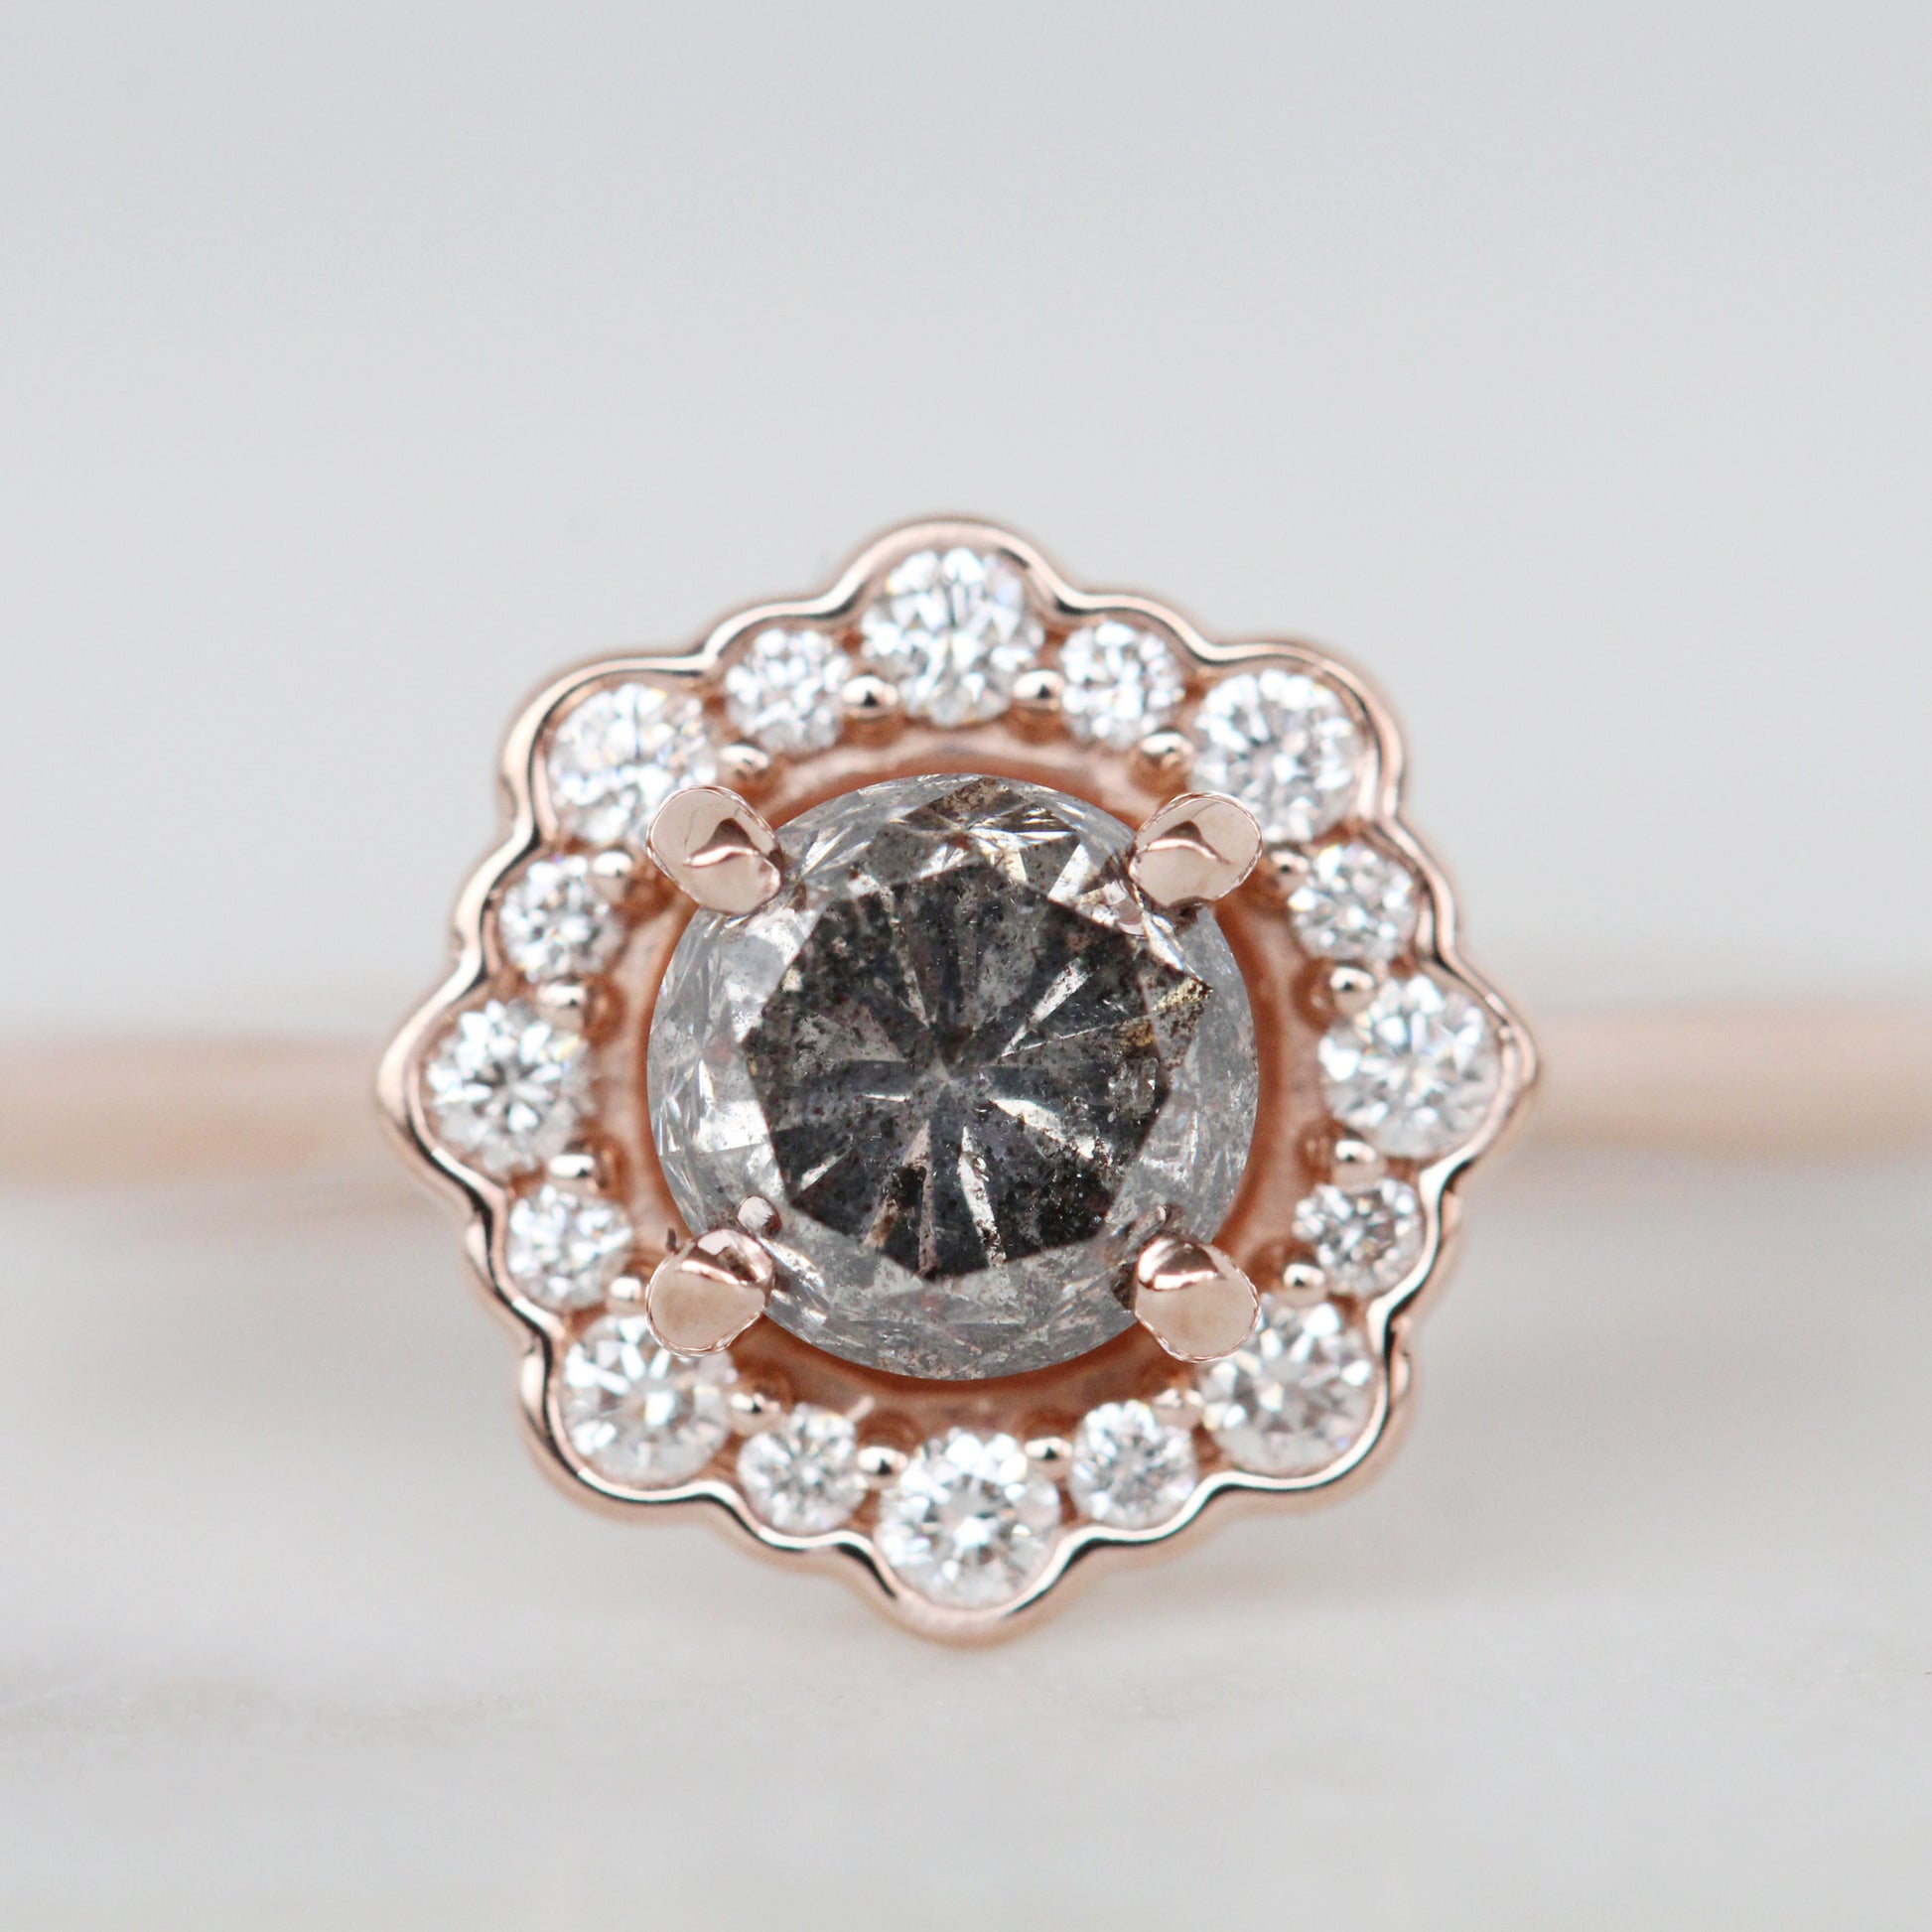 Daisy Ring with a 0.96 Carat Celestial Diamond and White Diamond Halo in 14k Rose Gold - Ready to Size and Ship - Midwinter Co. Alternative Bridal Rings and Modern Fine Jewelry